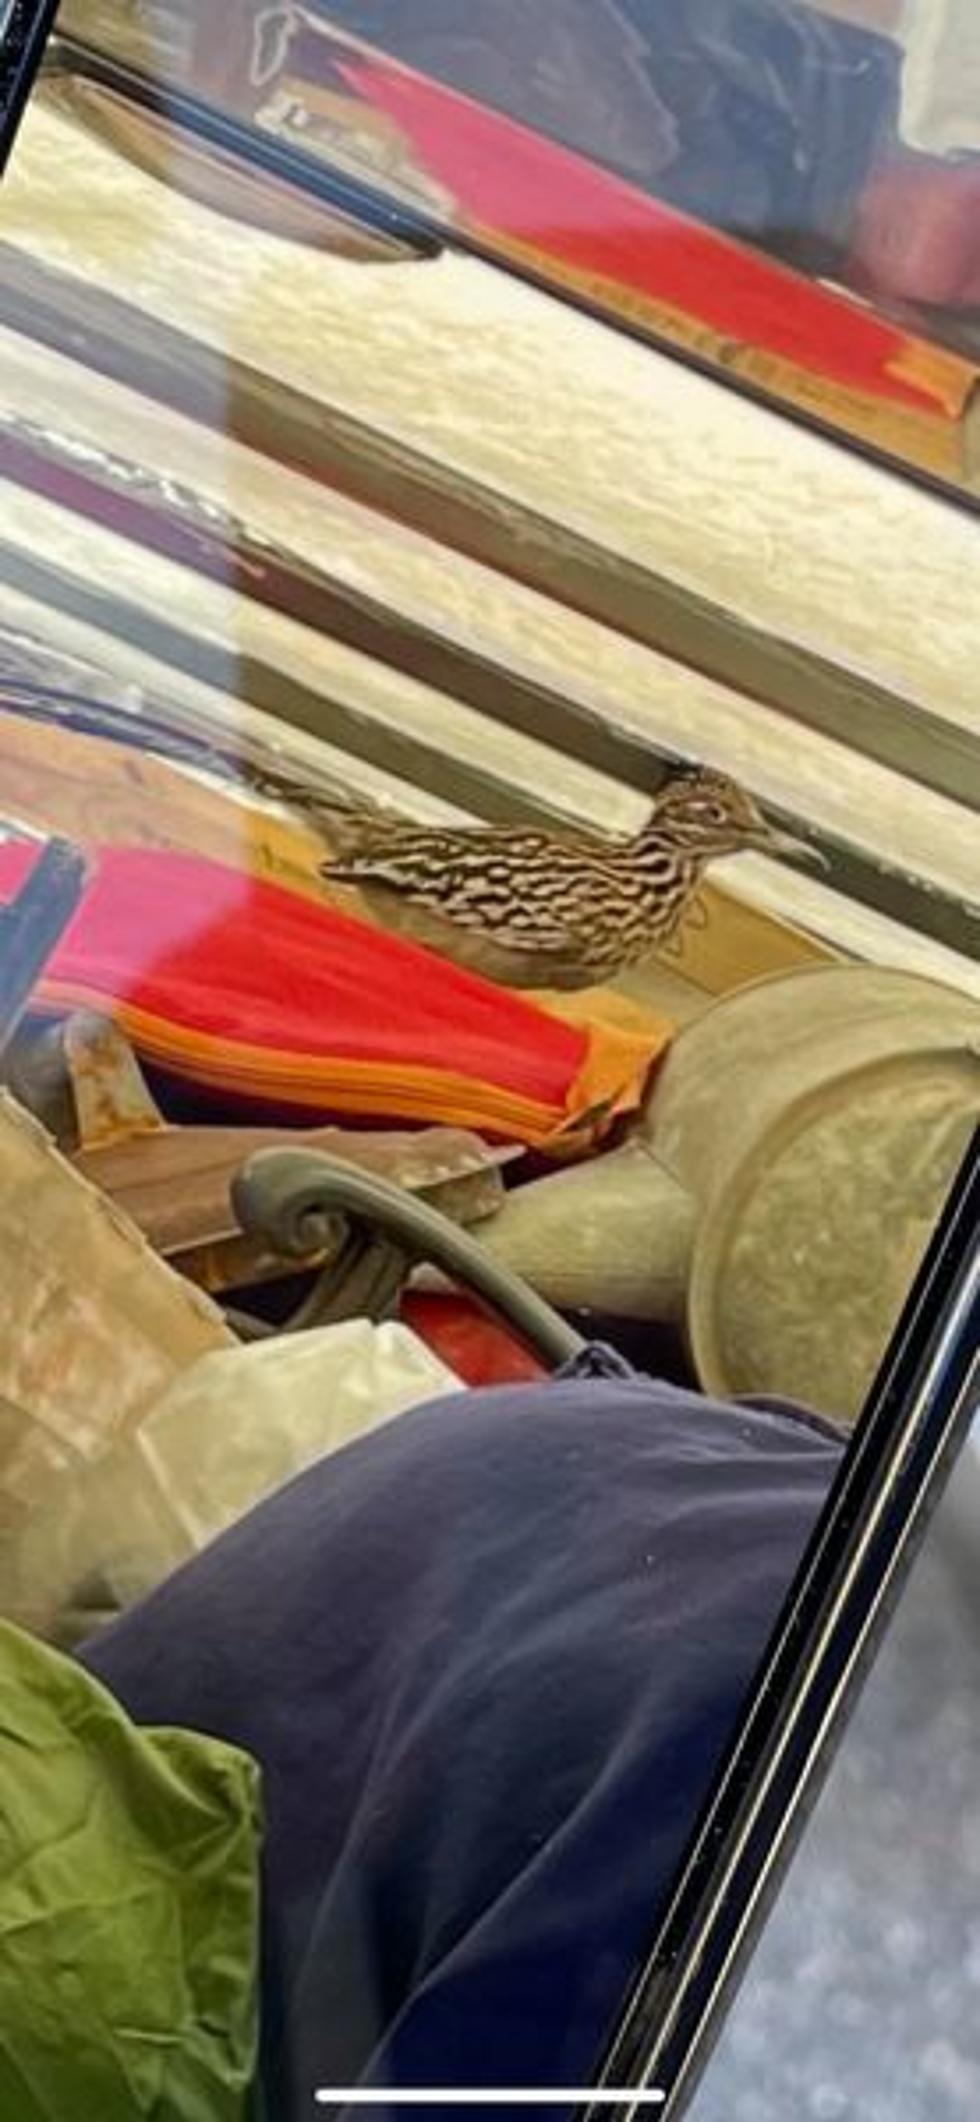 Roadrunner Bird Discovered in Maine Gets a Trip to Avian Haven